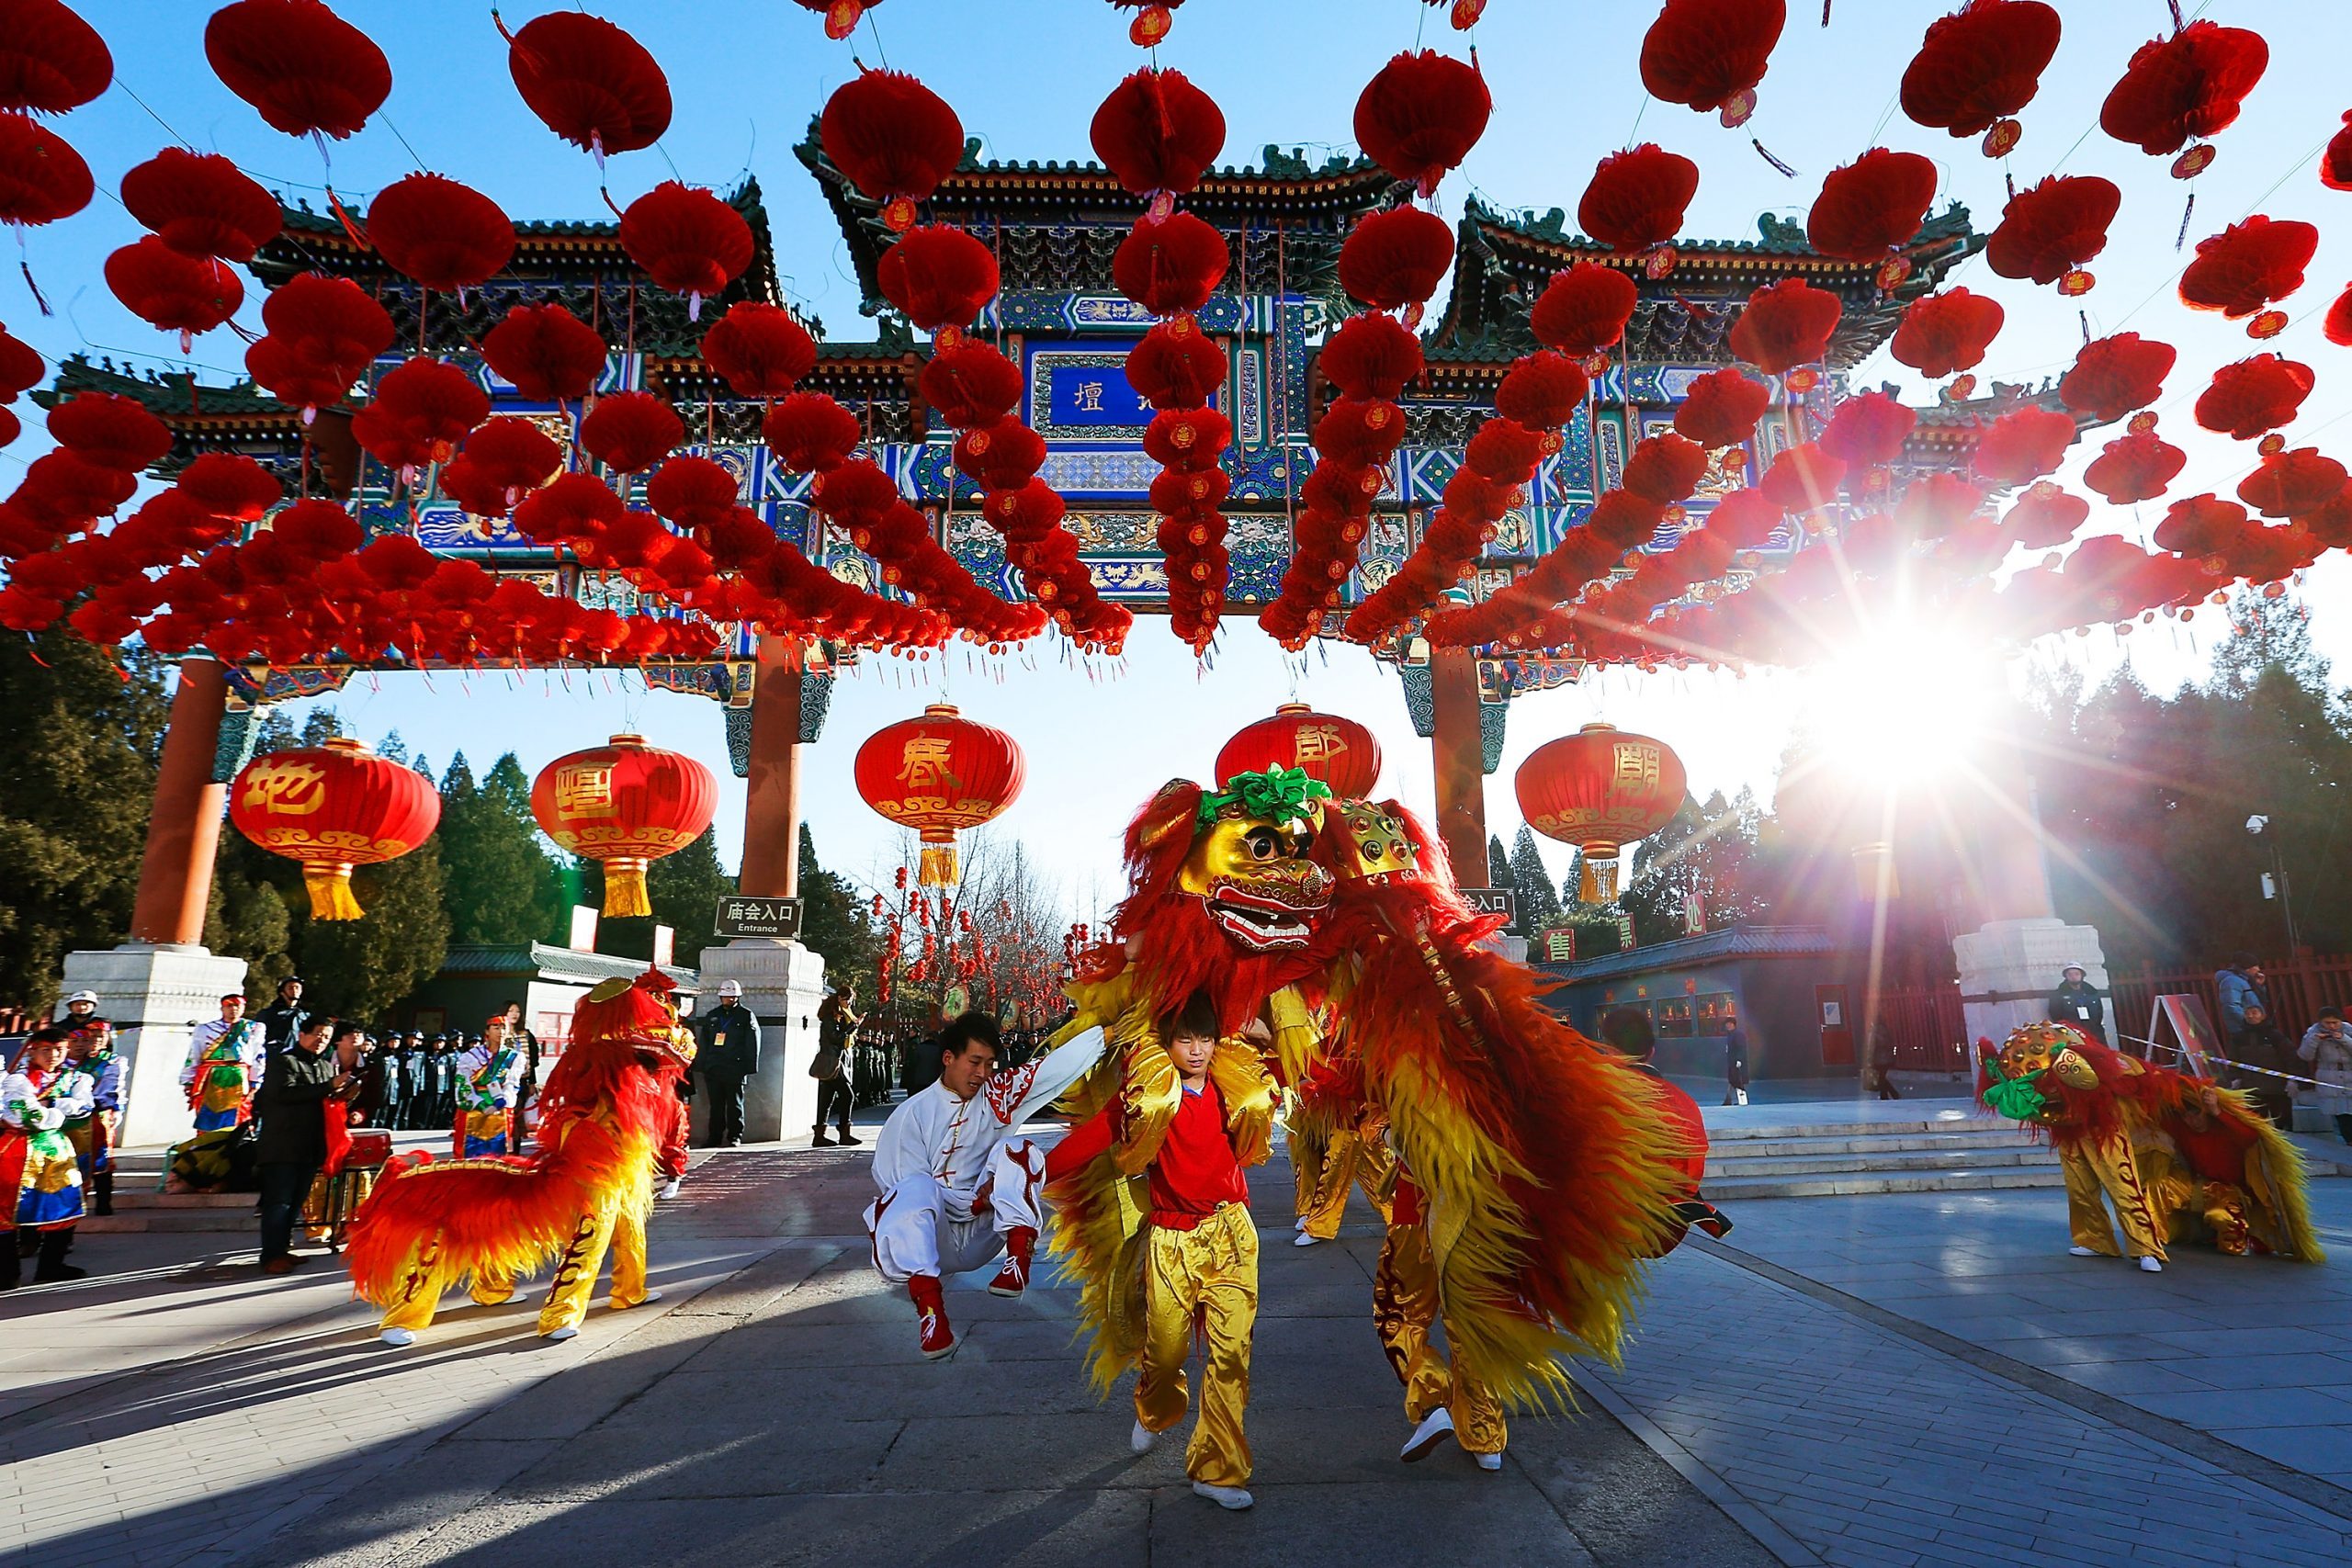 The festivities of Lunar New Year